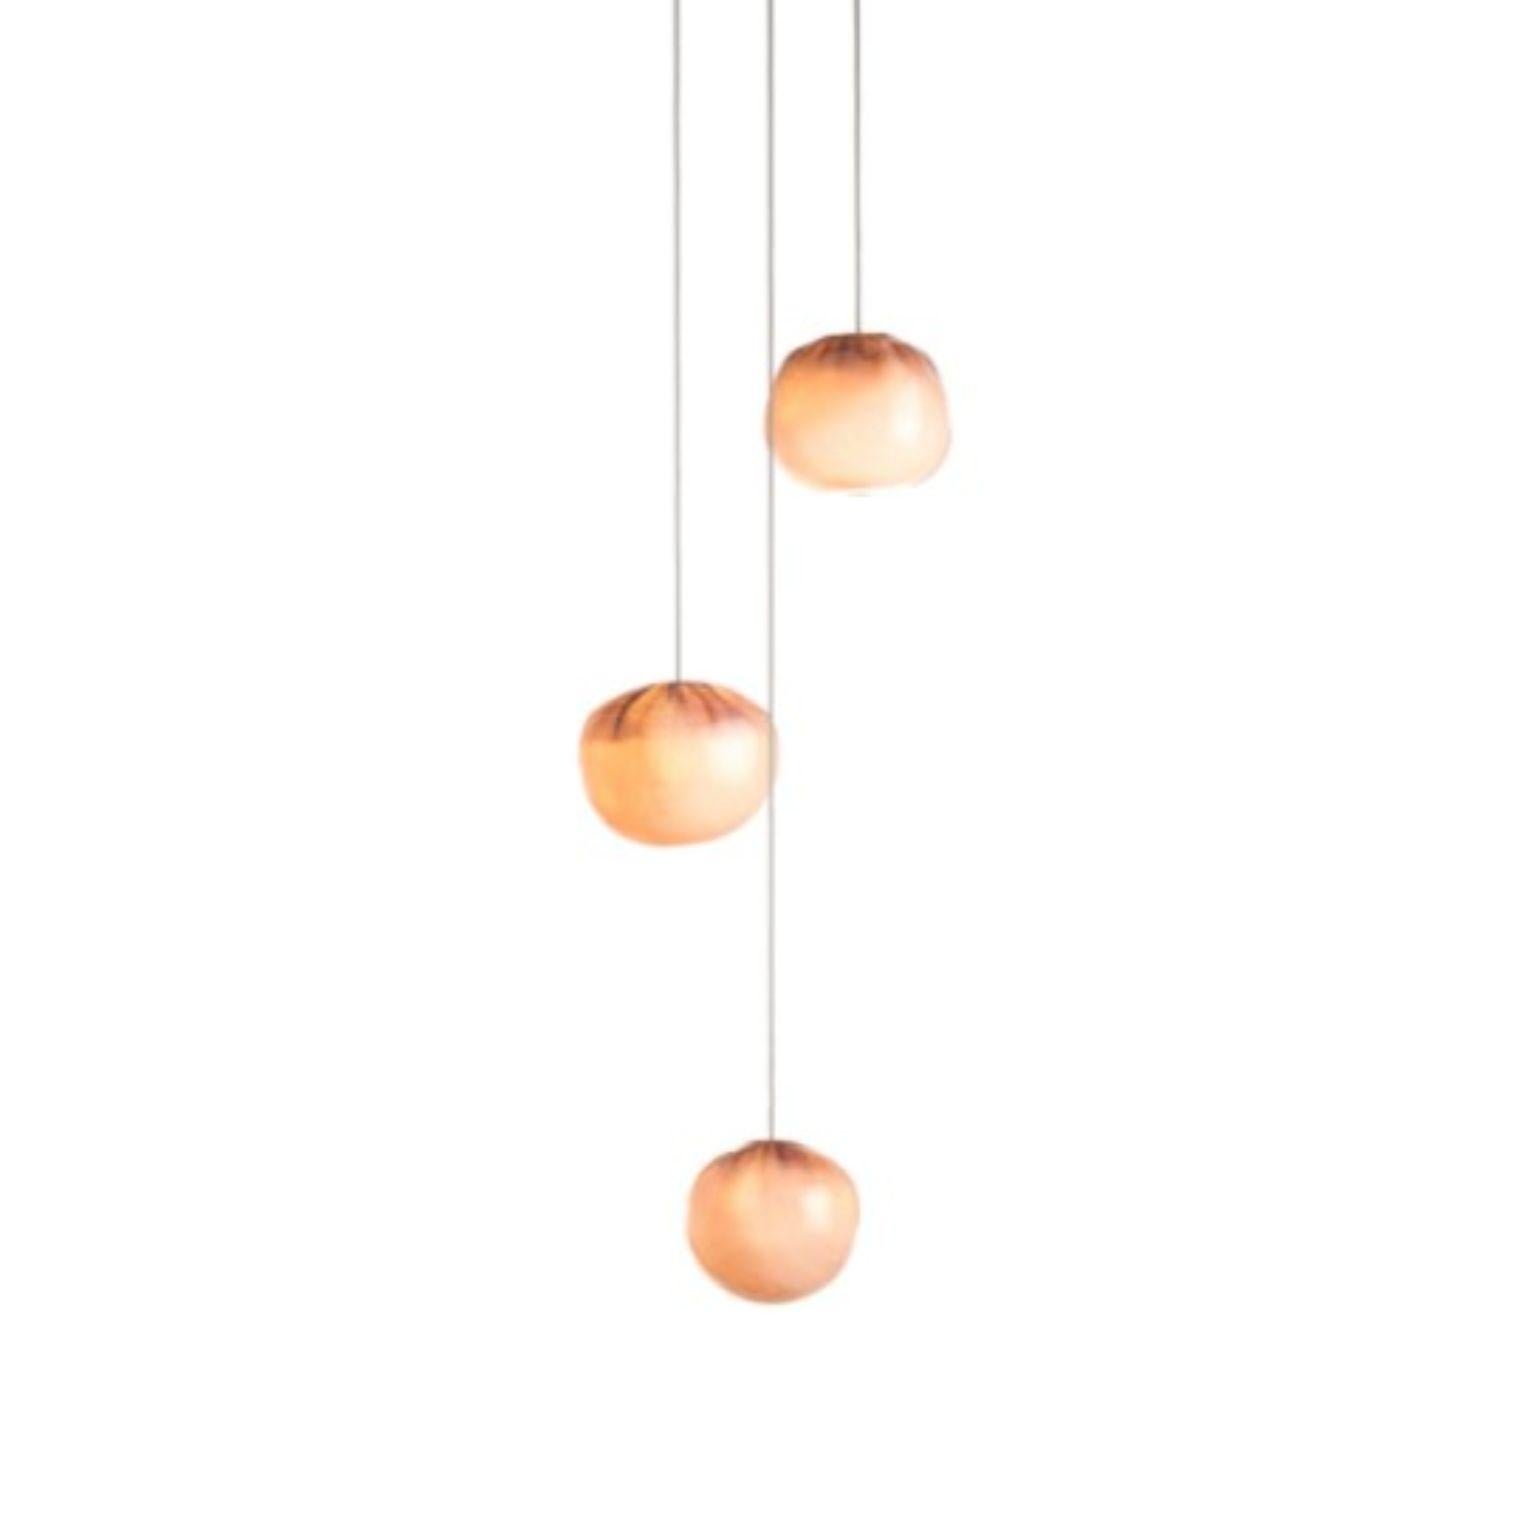 84.3 pendant by Bocci
Dimensions: D 15.2 x H 300 cm
Materials: white powder coated square canopy
Weight: 6.1 kg
Also available in different dimensions.

All our lamps can be wired according to each country. If sold to the USA it will be wired